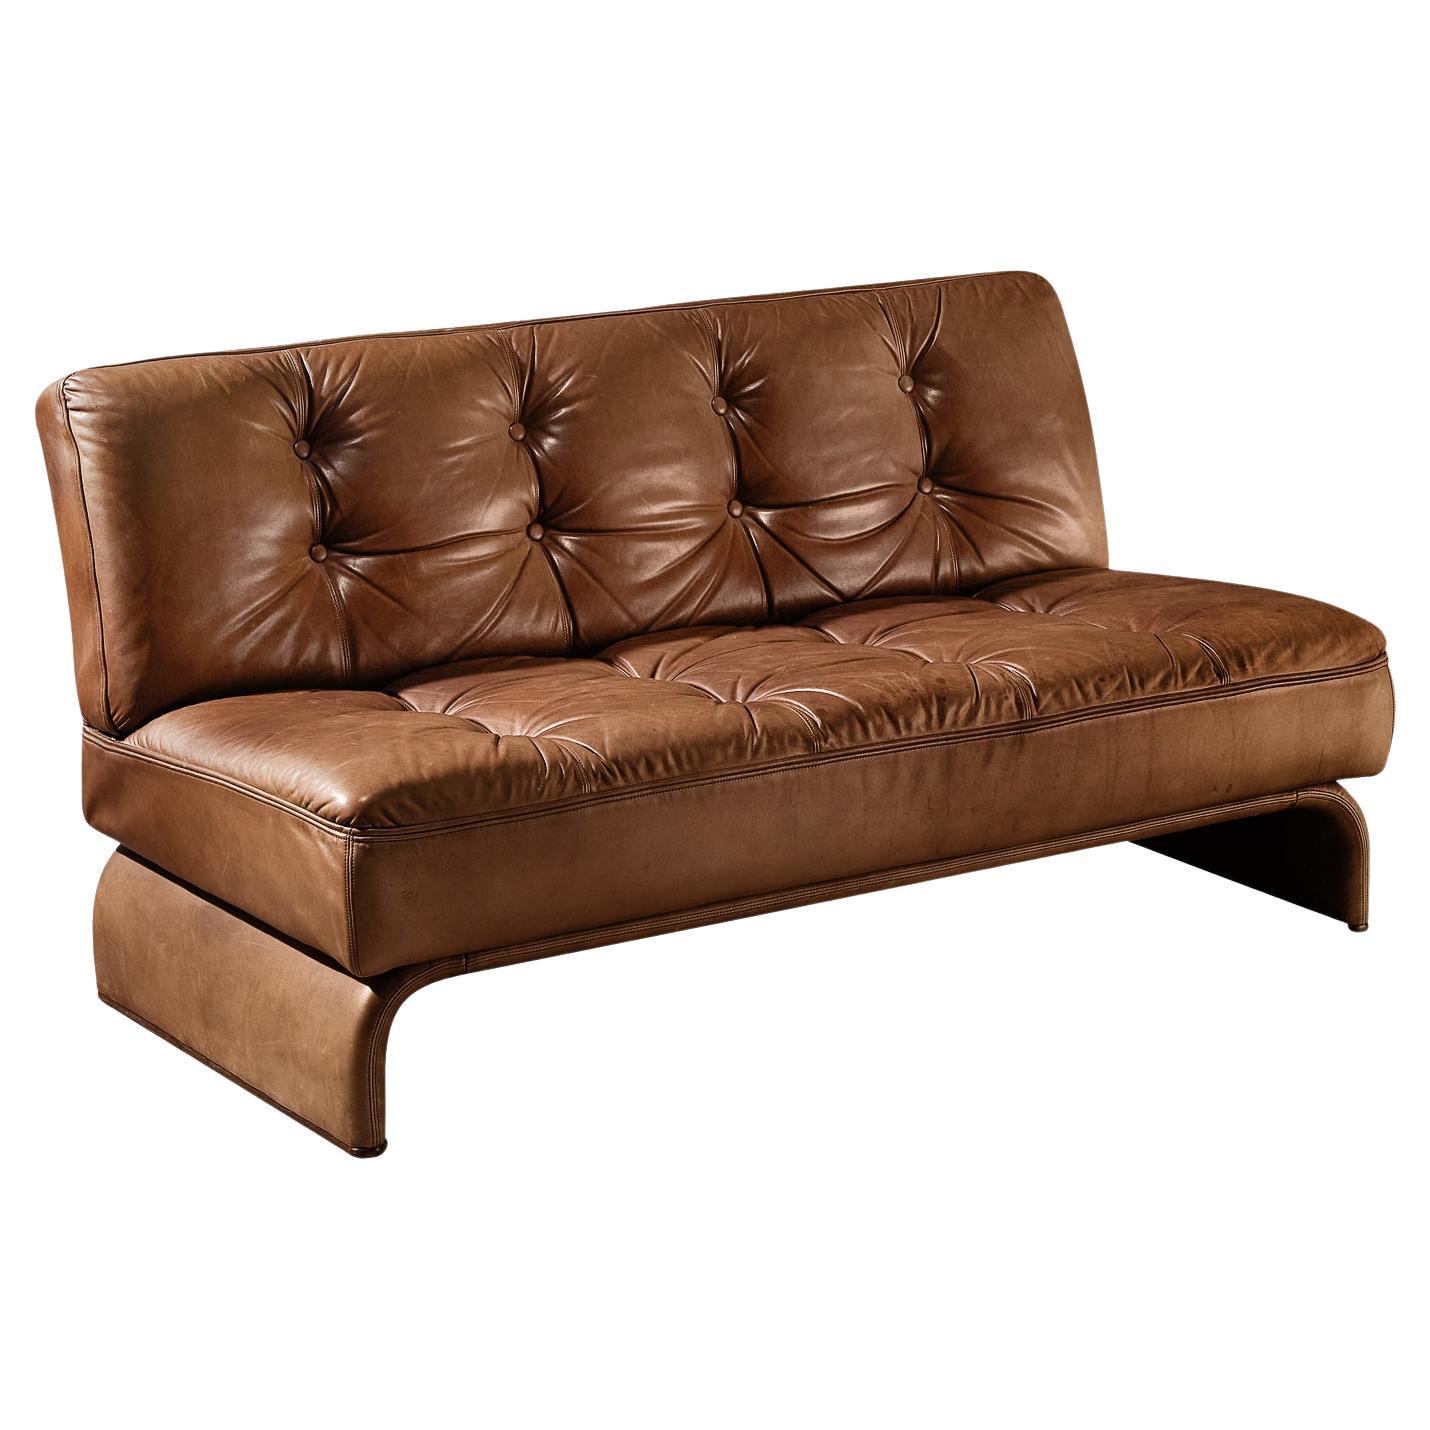 Johannes Spalt for Wittmann 'Constanze' Sofa or Daybed in Cognac Leather 